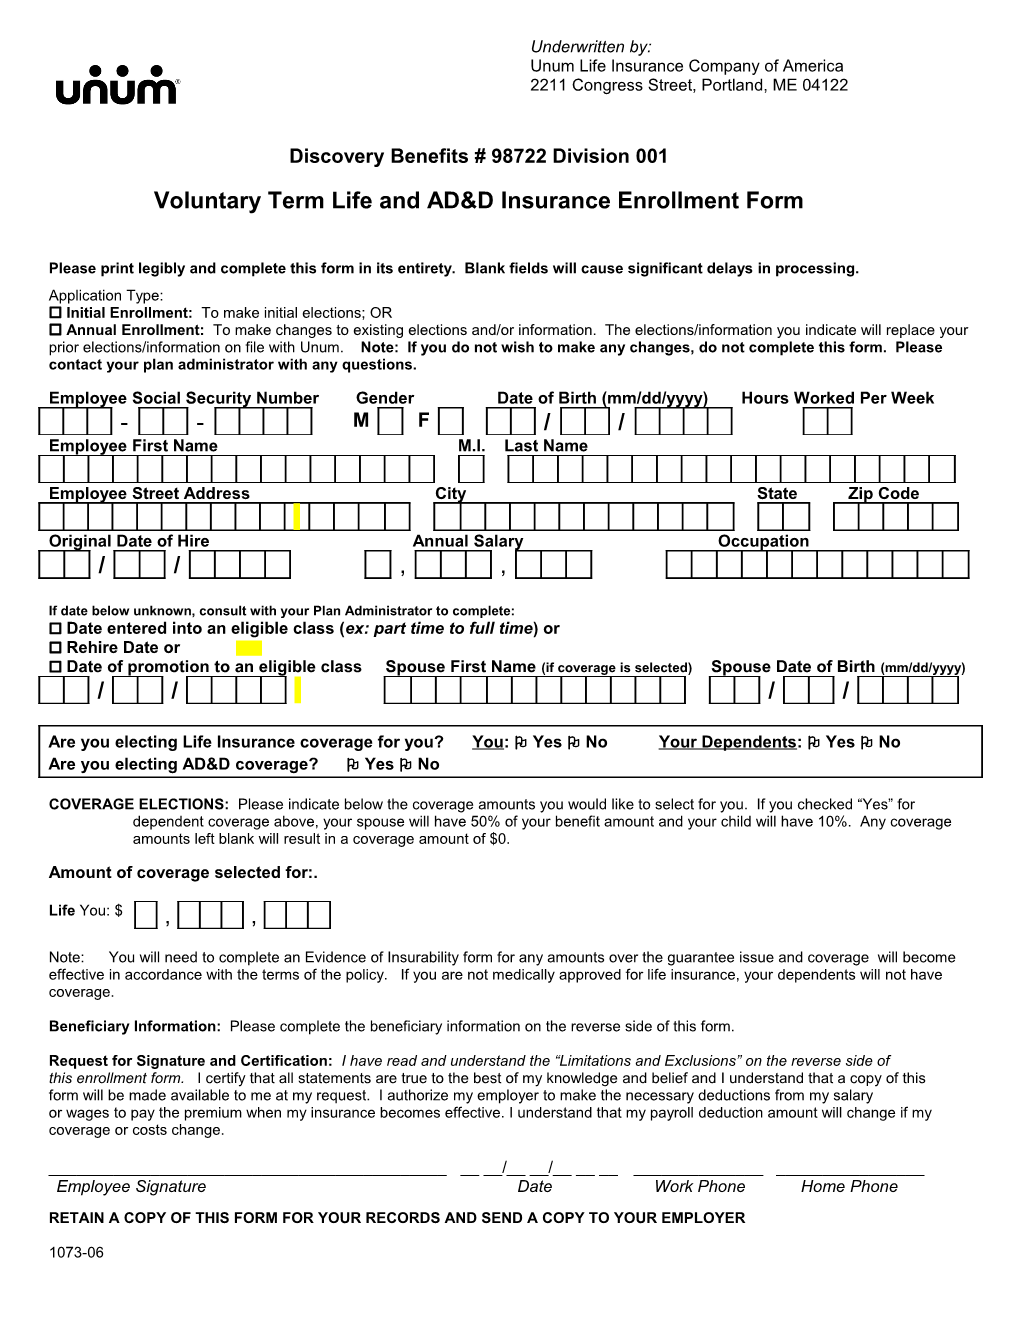 Voluntary Term Life and AD&D Insurance Enrollment Form